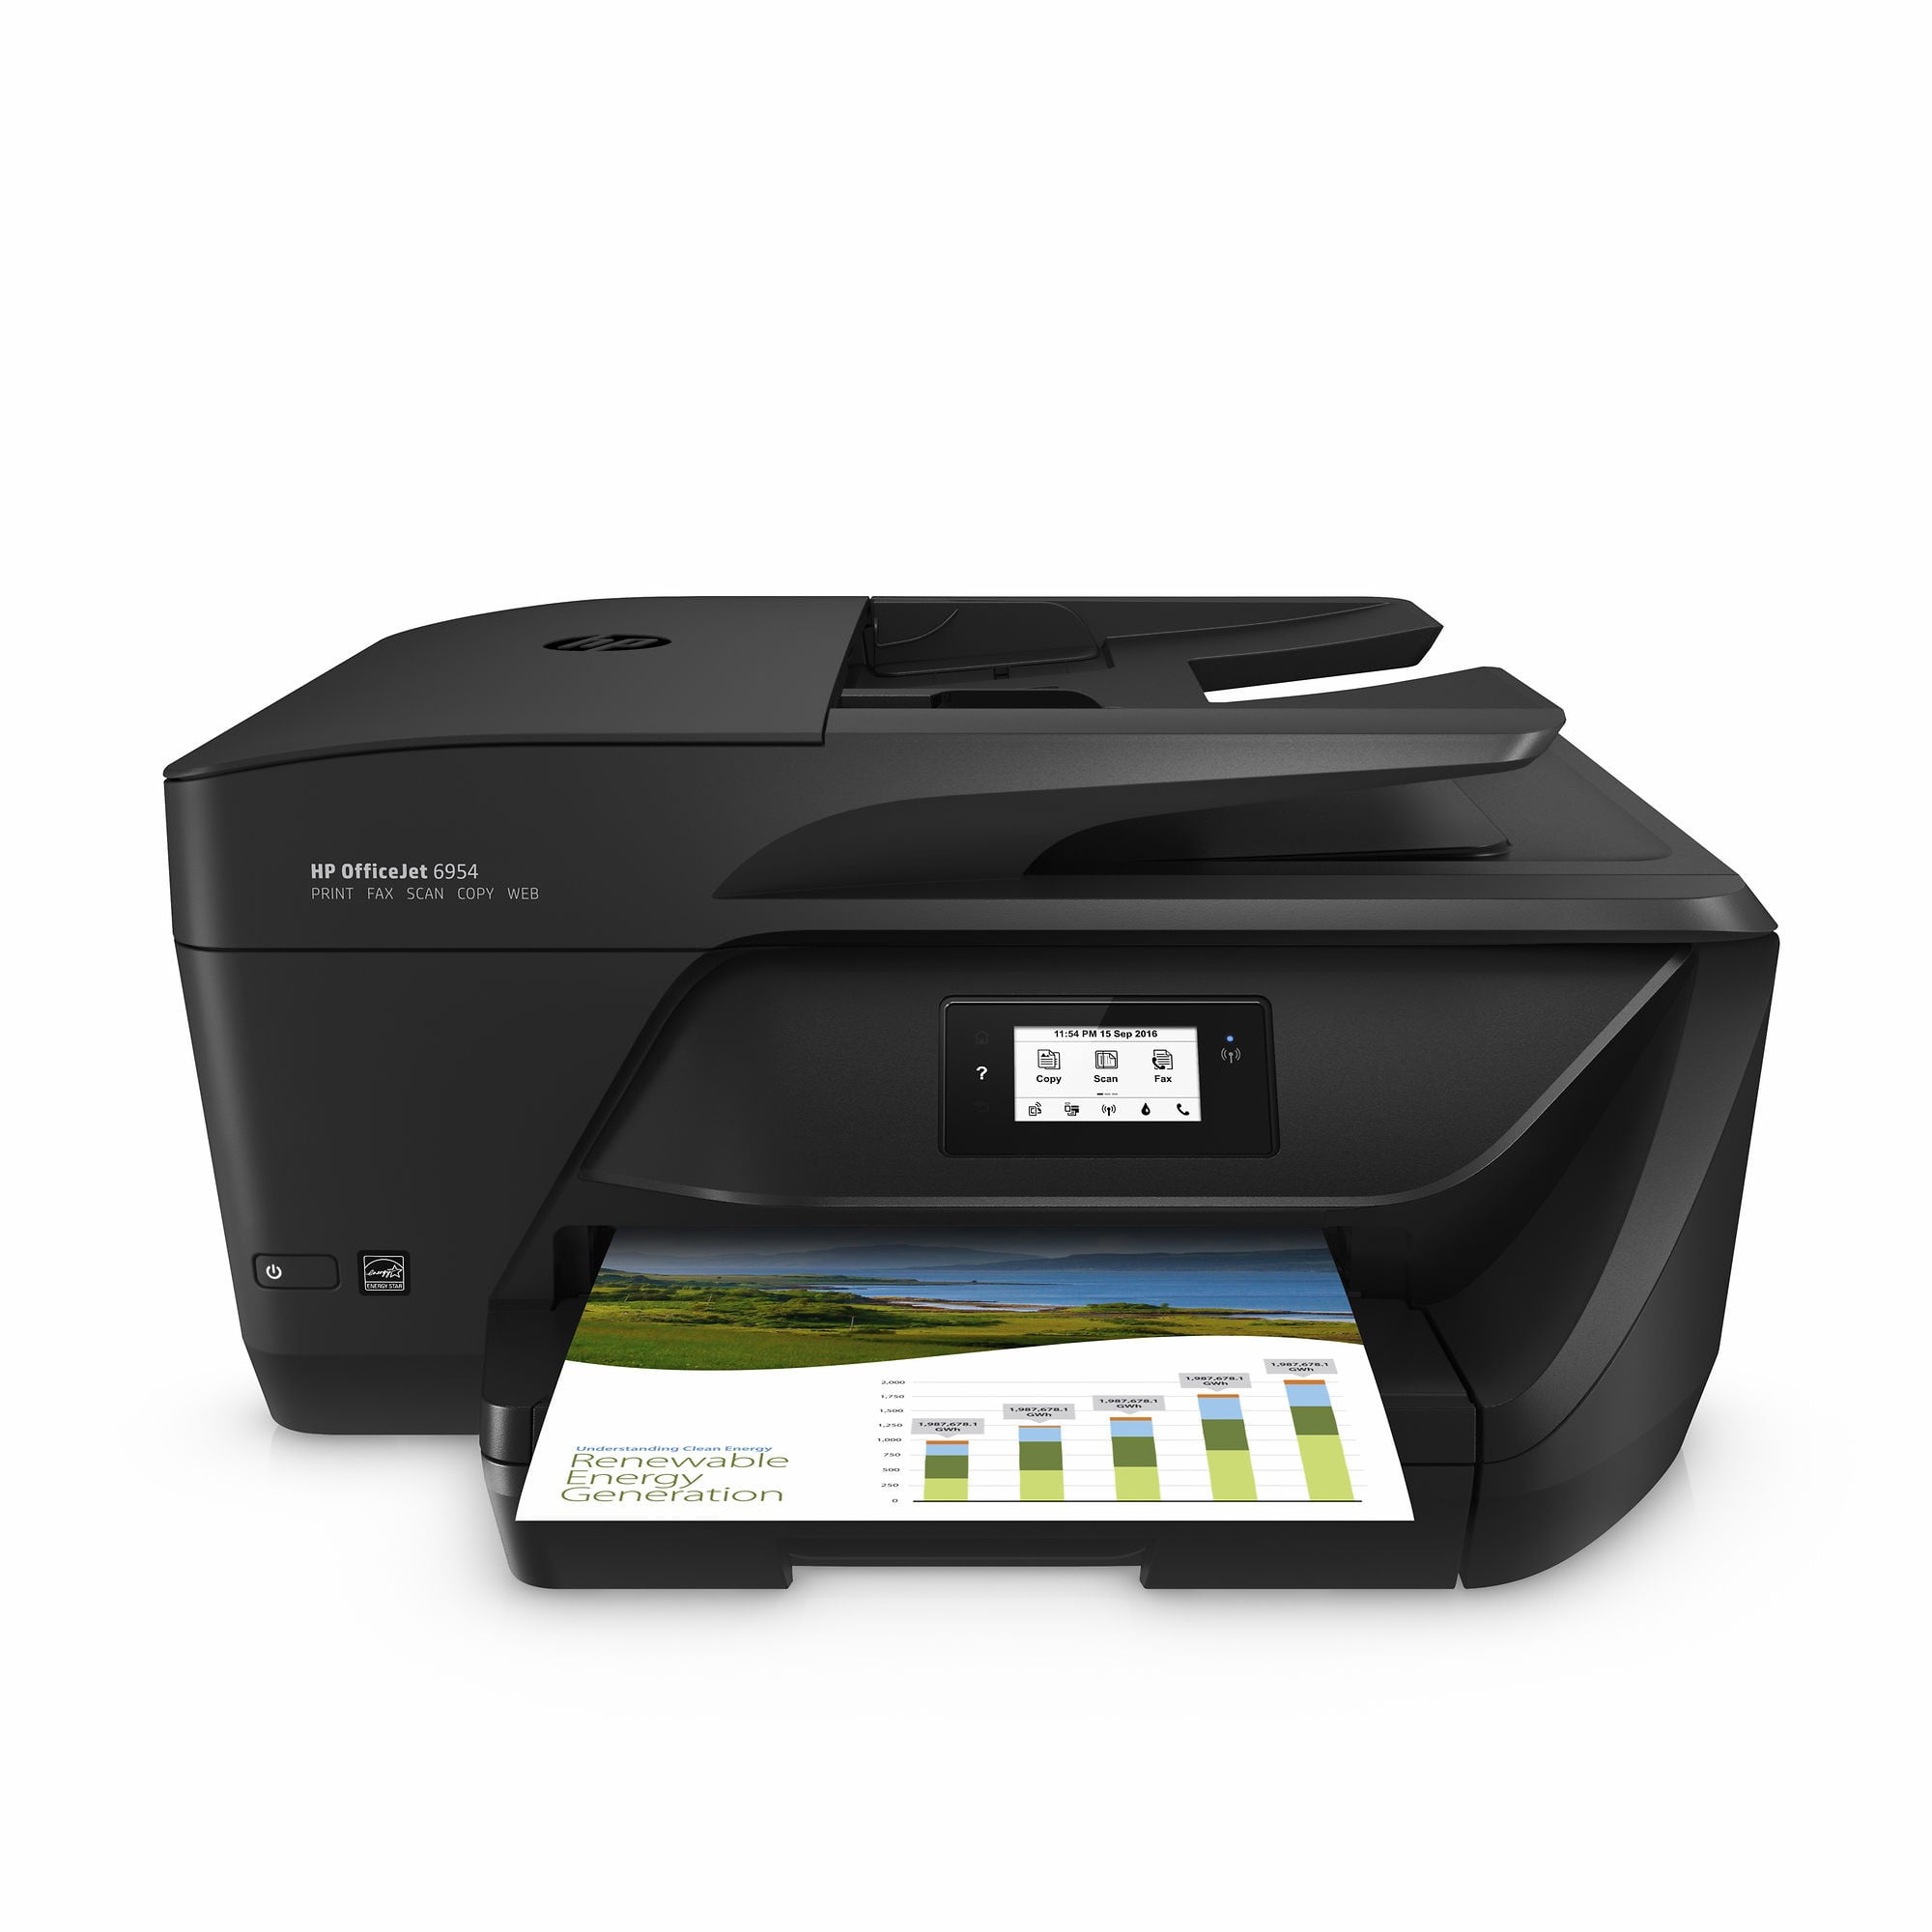 HP OfficeJet 6950 All-in-One Printer